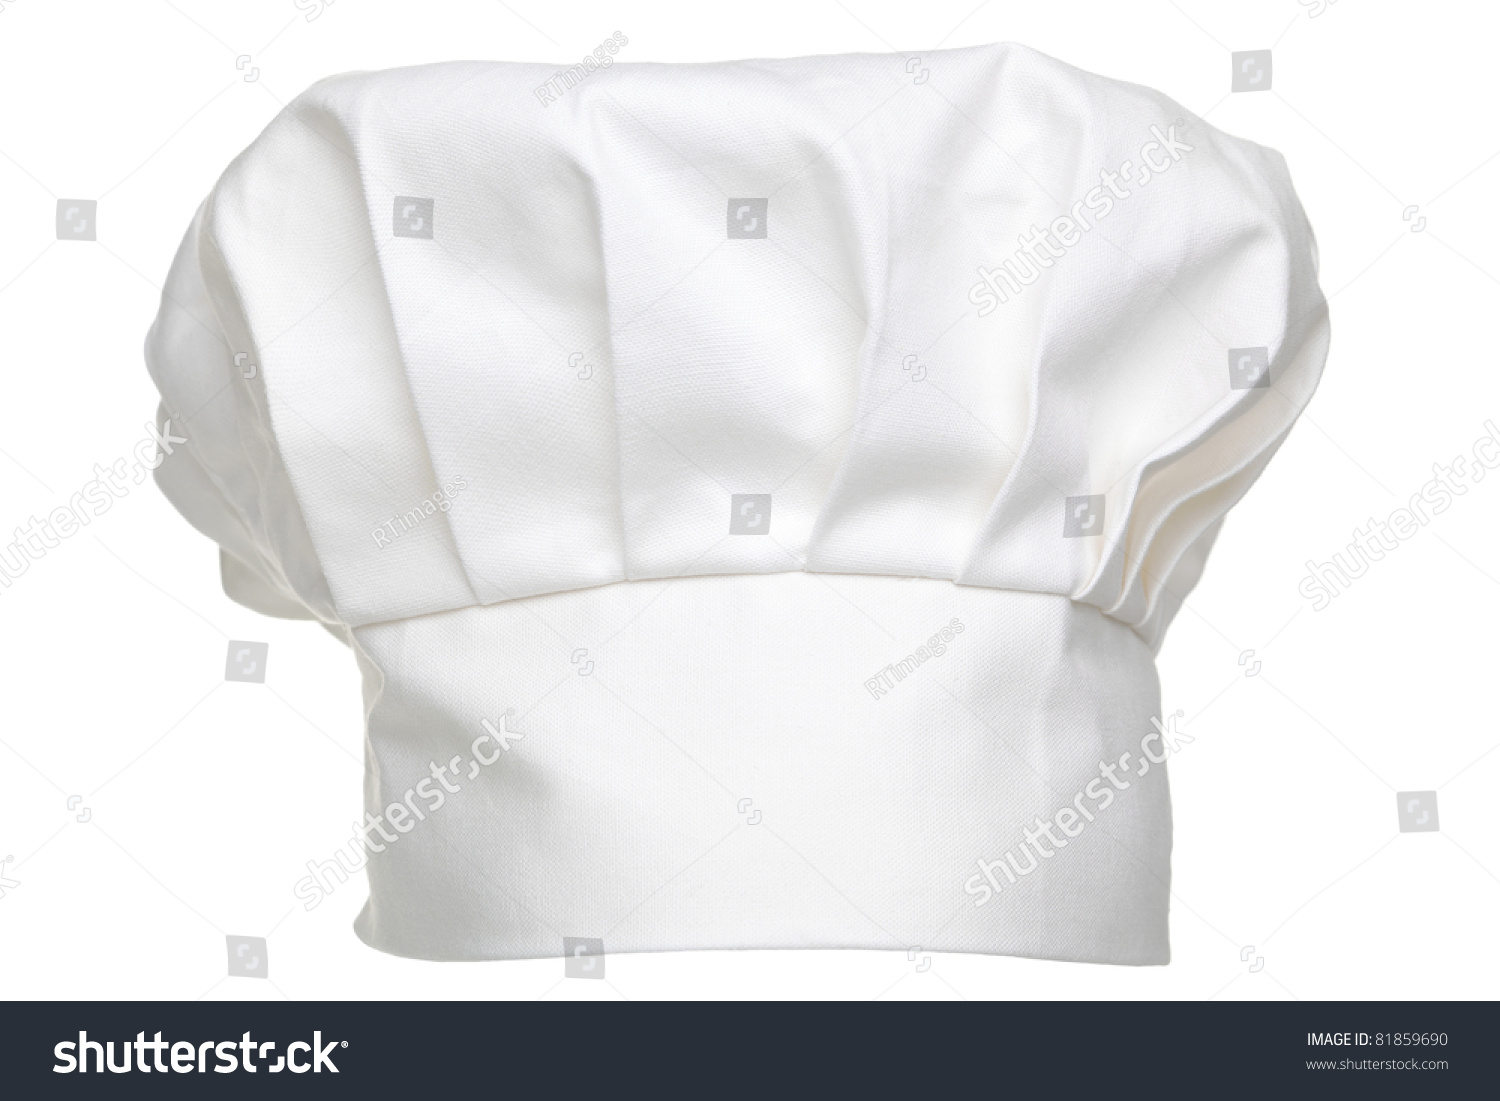 Photo of a chefs hat traditionally called a toque blanche, isolated on a white background. #81859690